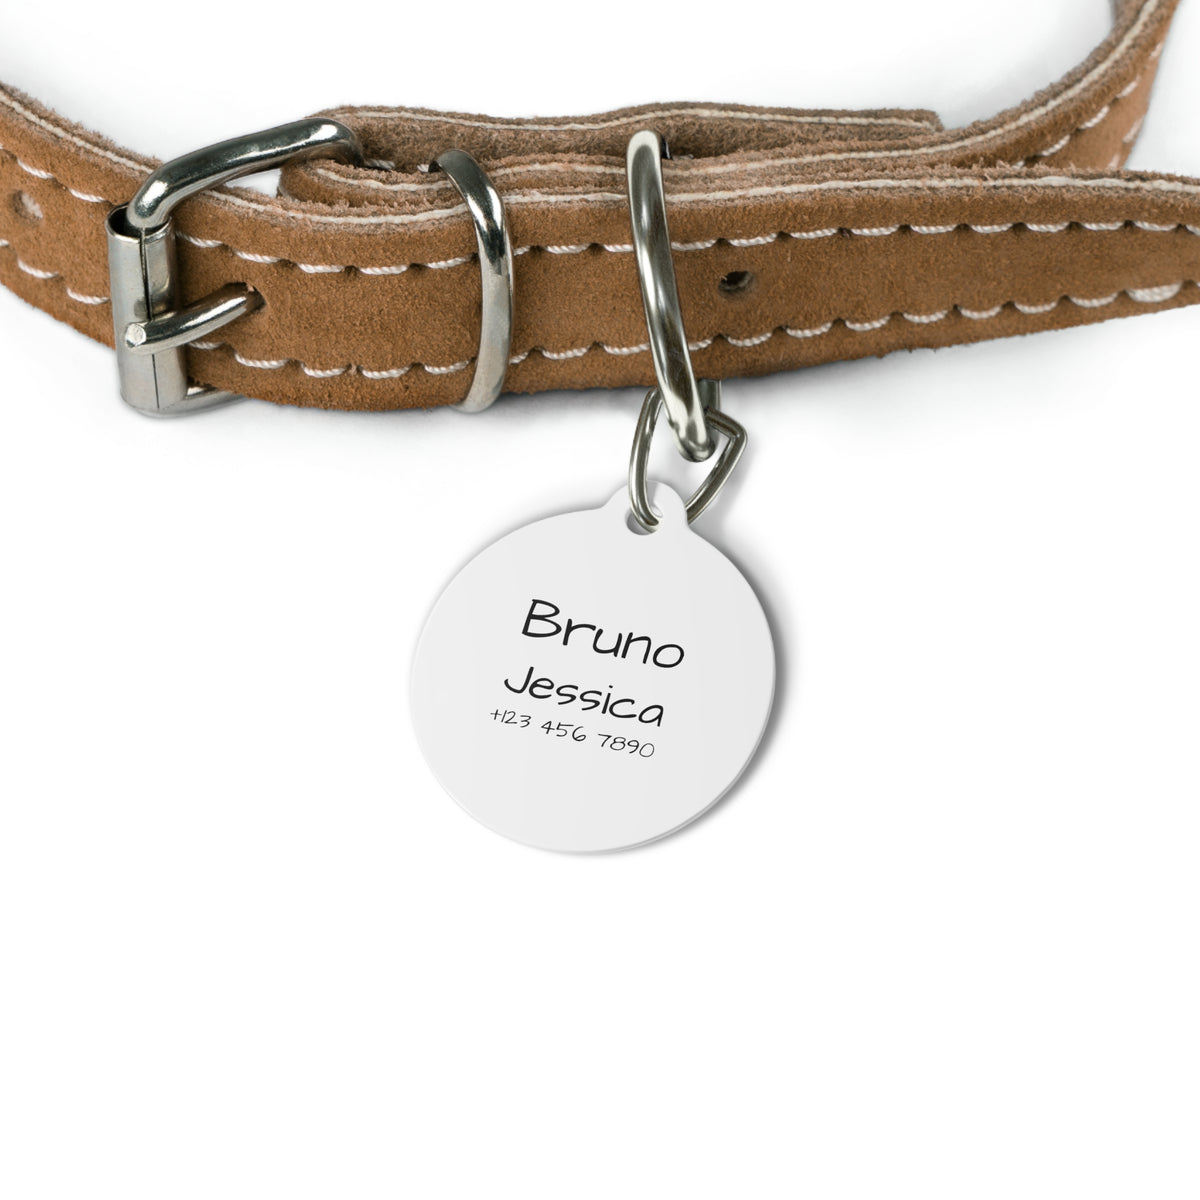 Personalized Dog Name & Owner Name Anti-lost Pet Tag